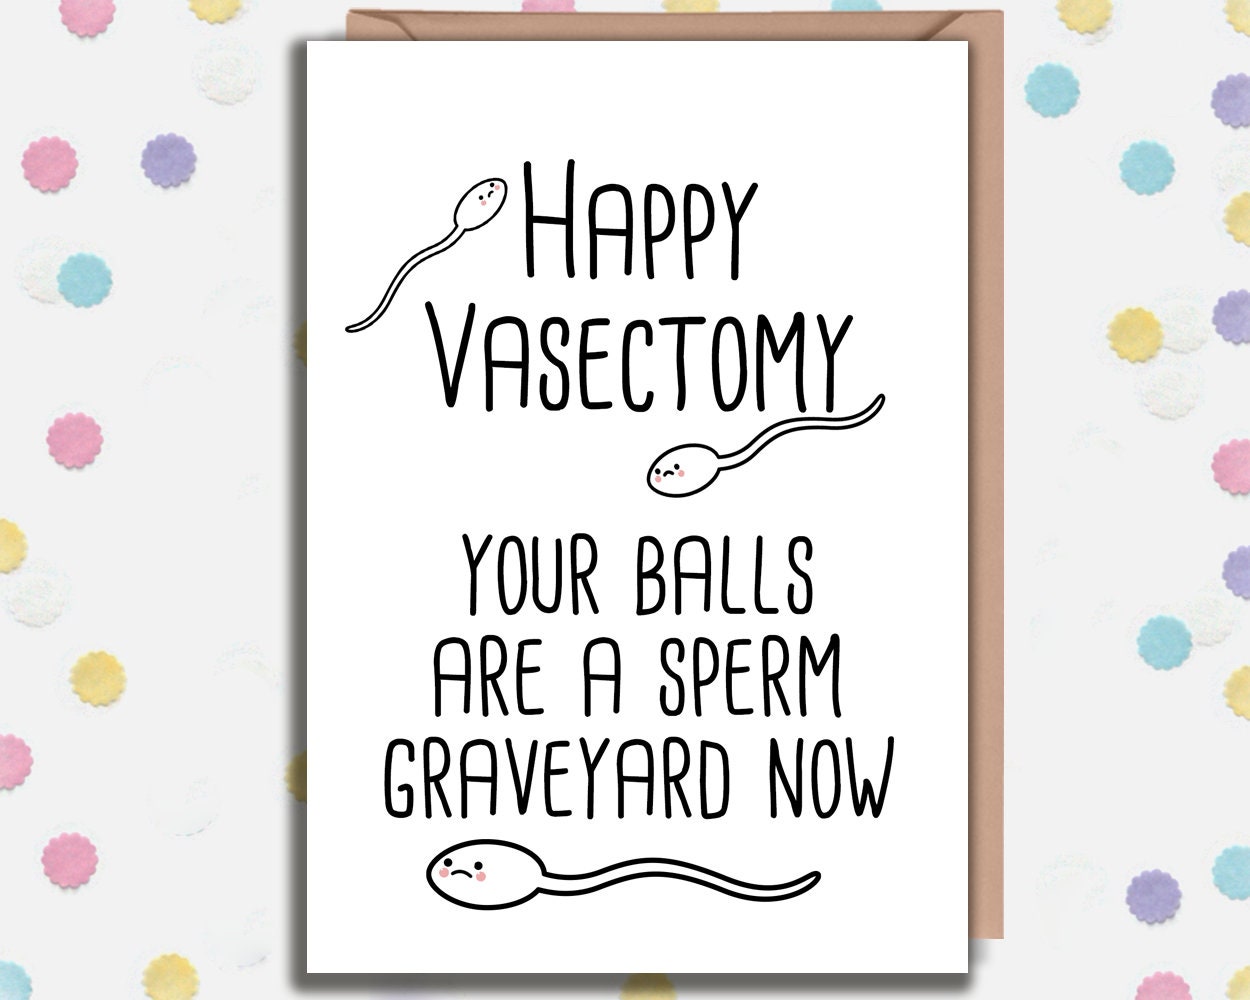 vasectomy-card-funny-get-well-soon-card-vasectomy-reversal-etsy